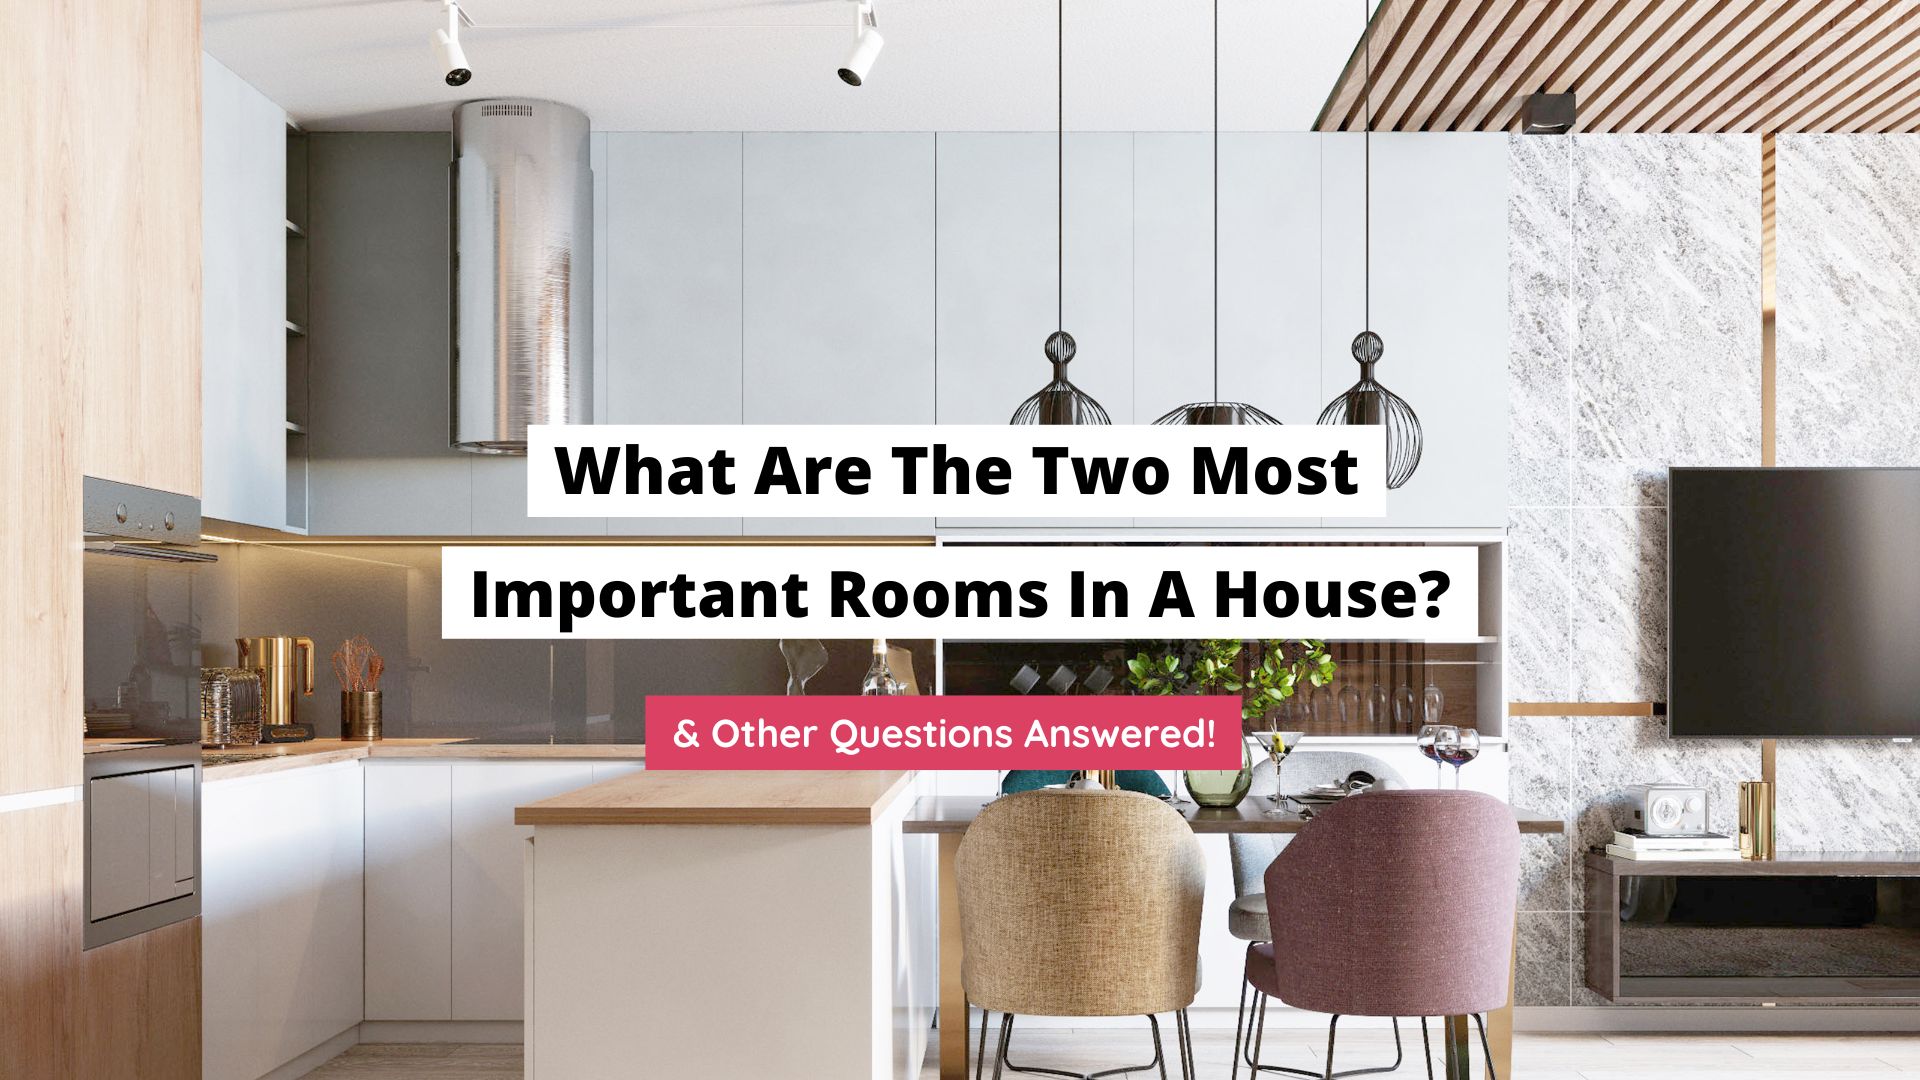 What Are The Two Most Important Rooms In A House